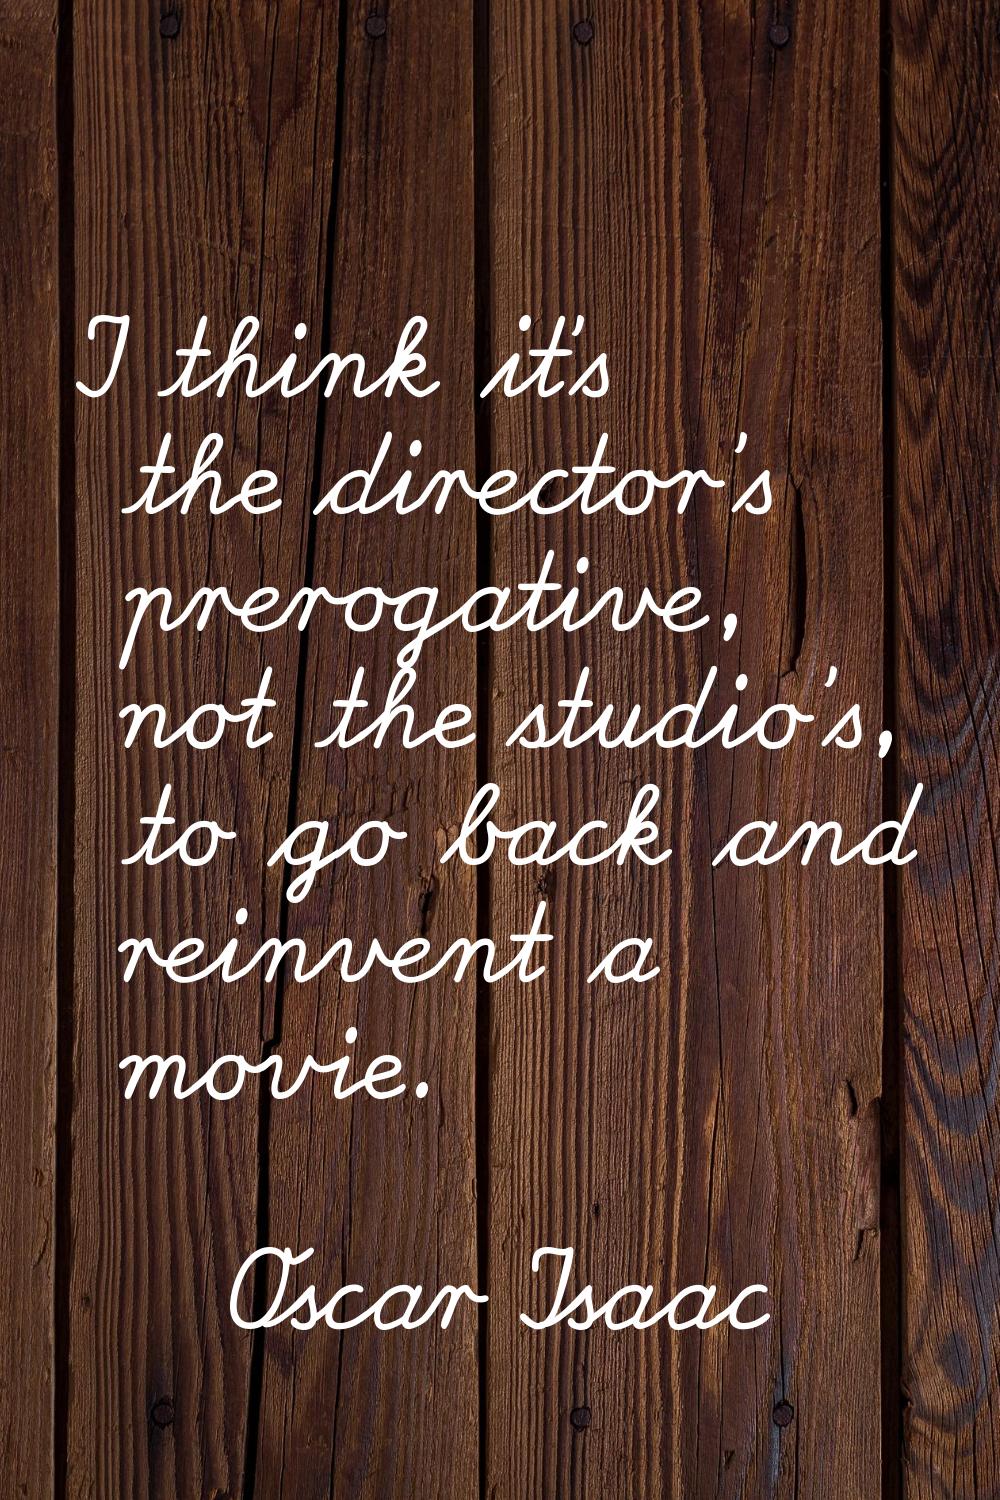 I think it's the director's prerogative, not the studio's, to go back and reinvent a movie.